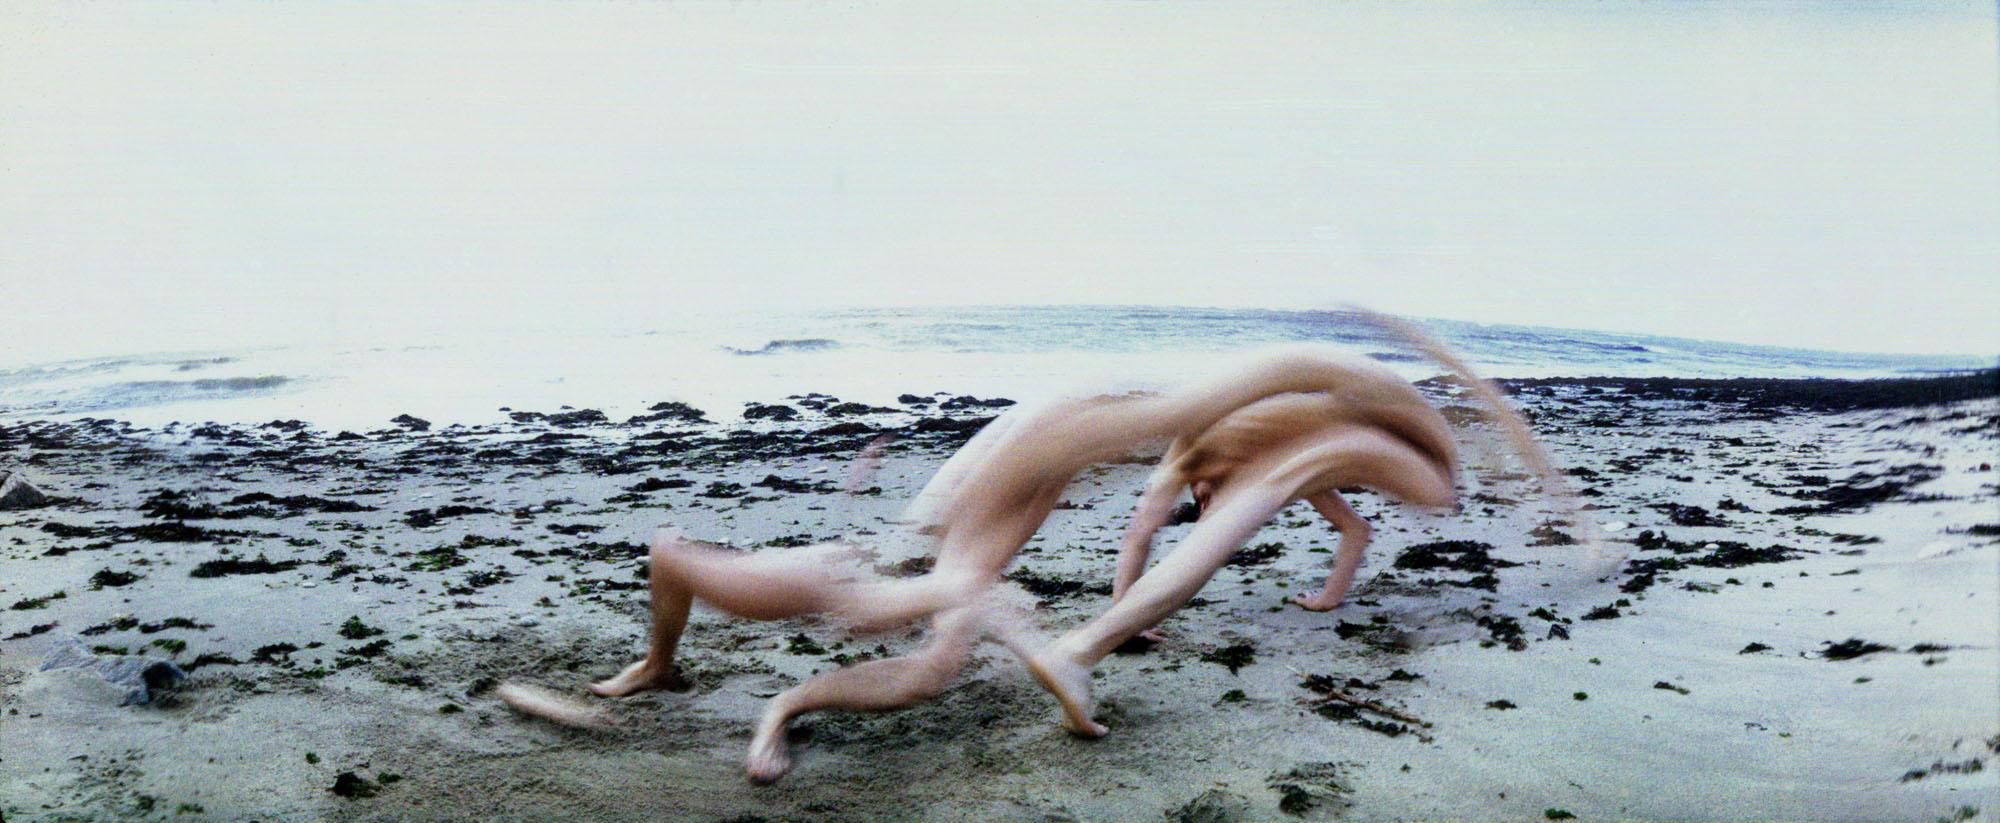 Frederic Fontenoy, Metamorphosis - blurred, overlapping body on shore